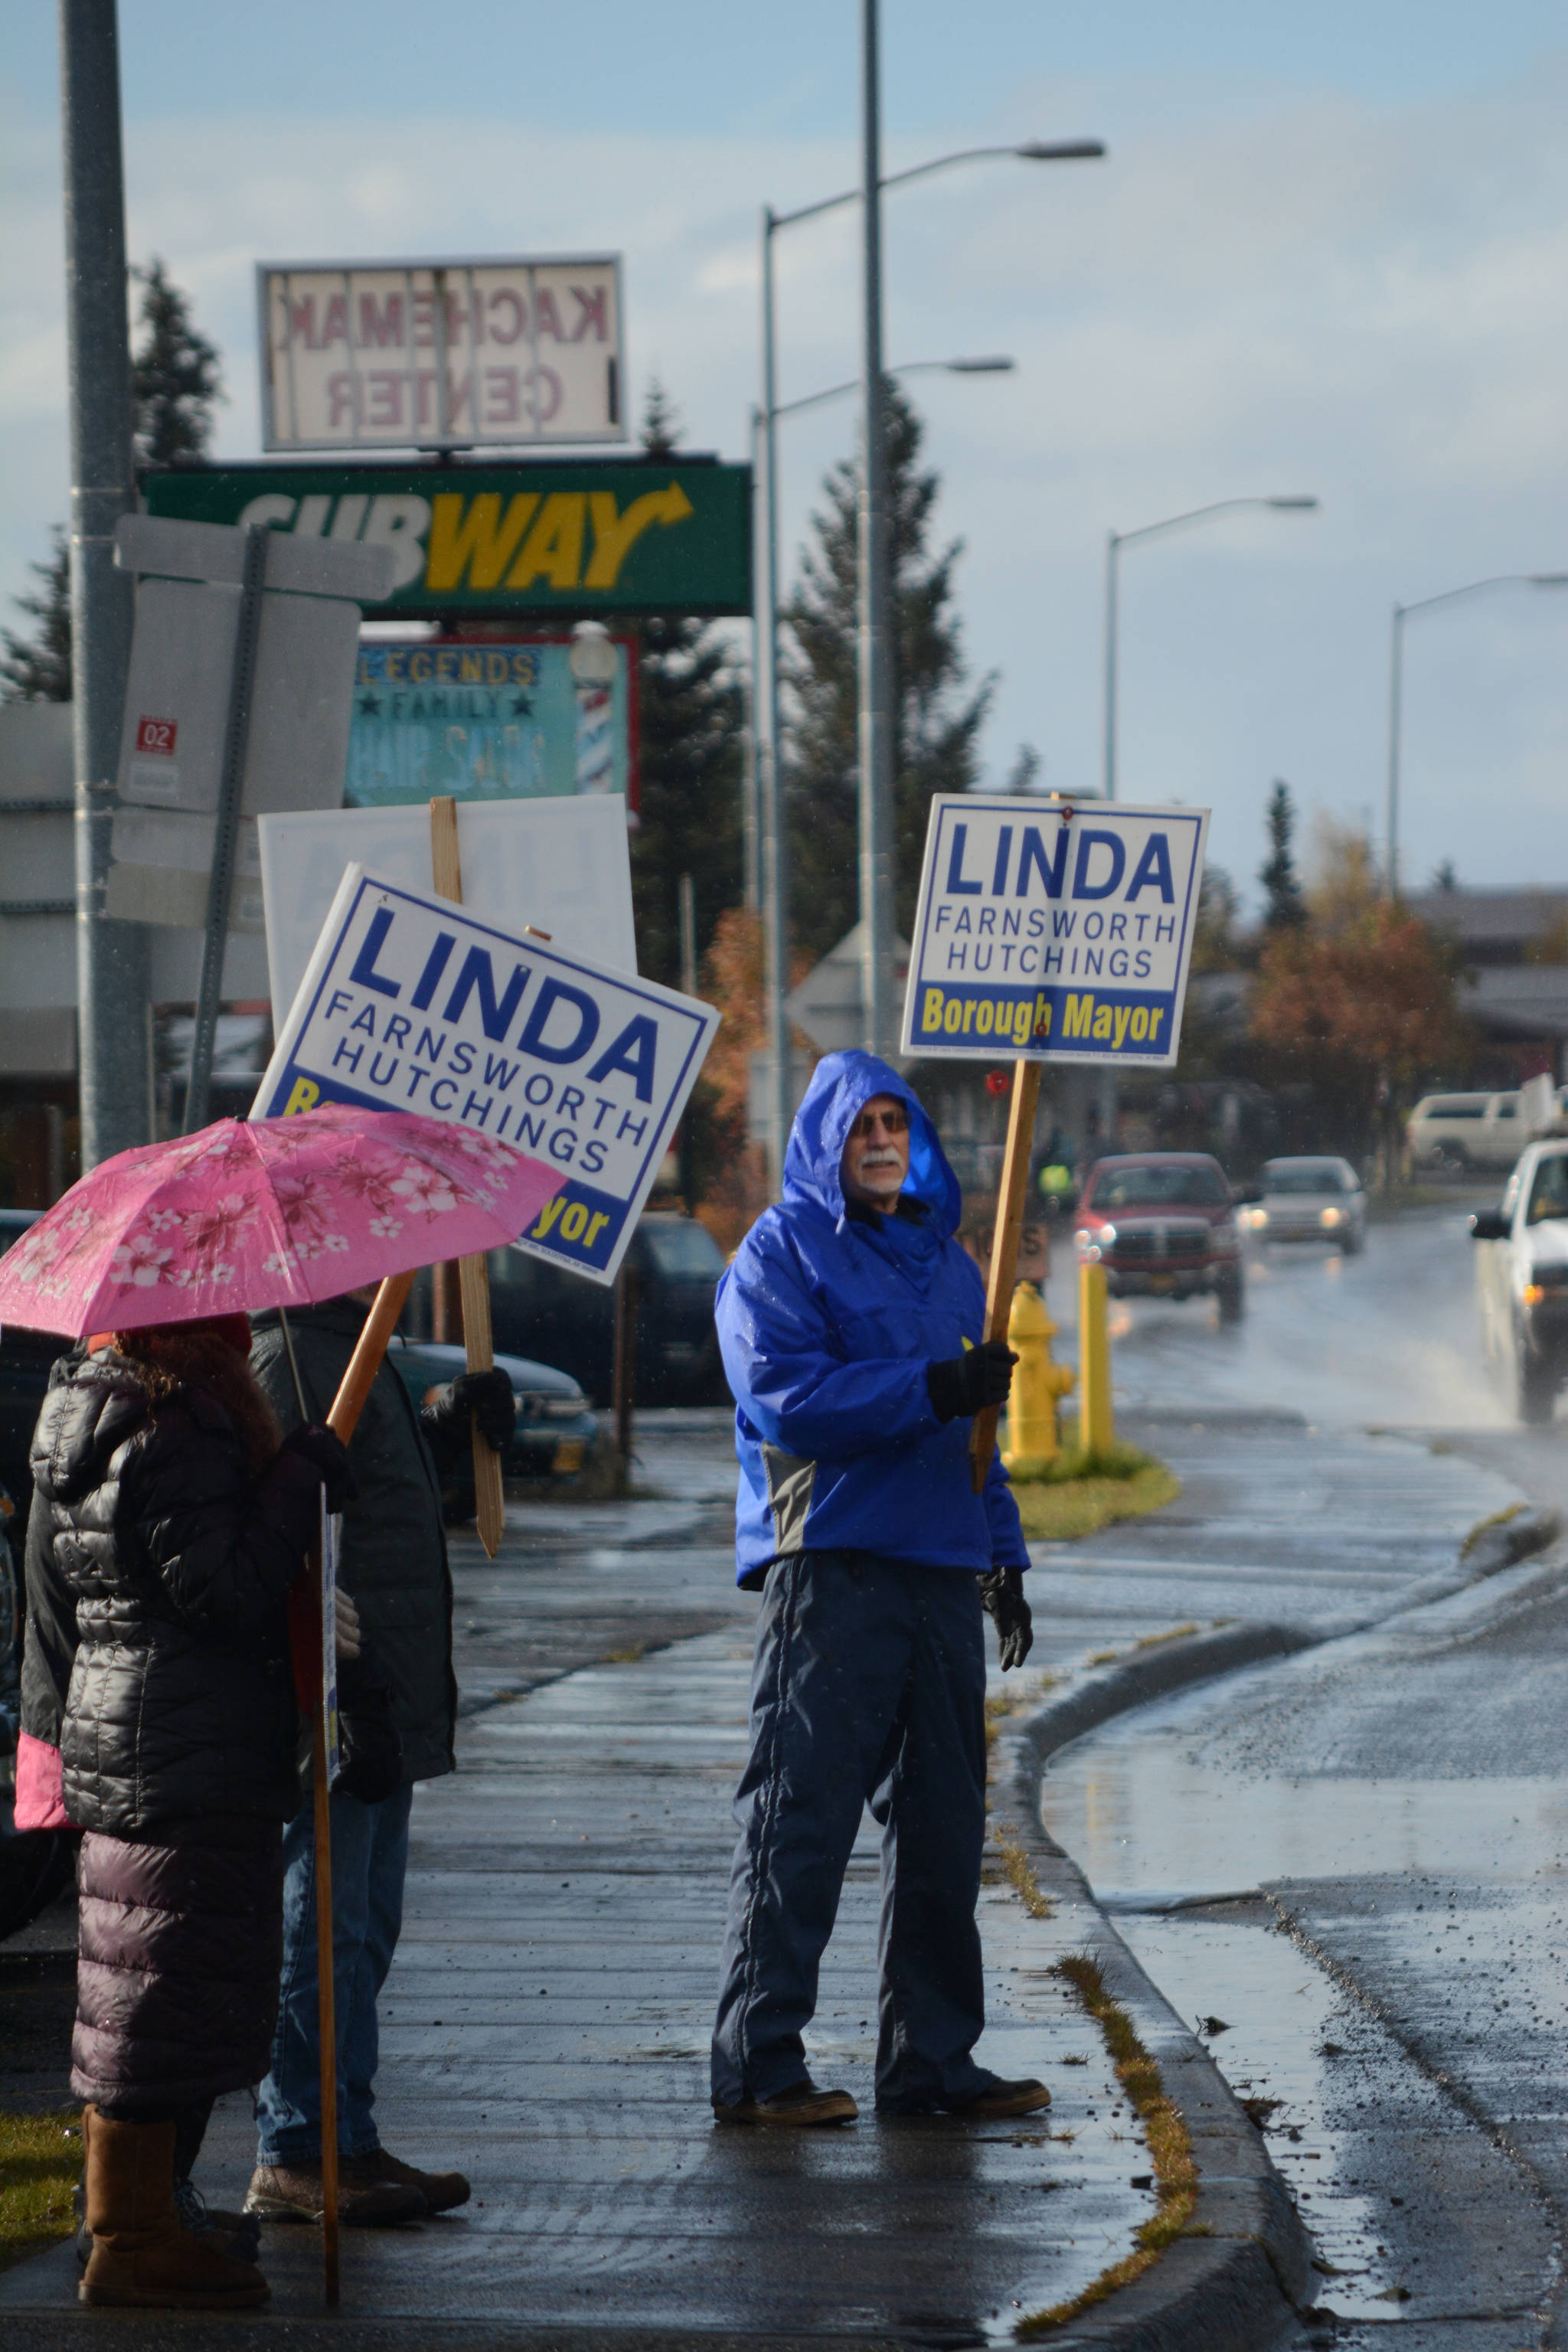 Wayne Aderhold, front, waves signs for Linda Hutchings on Tuesday afternoon, Oct. 24, 2017, in Homer, Alaska, on Pioneer Avenue. To his left are Marjorie Ringer, with umbrella, and Ron Keffer. (Photo by Michael Armstrong, Homer News)